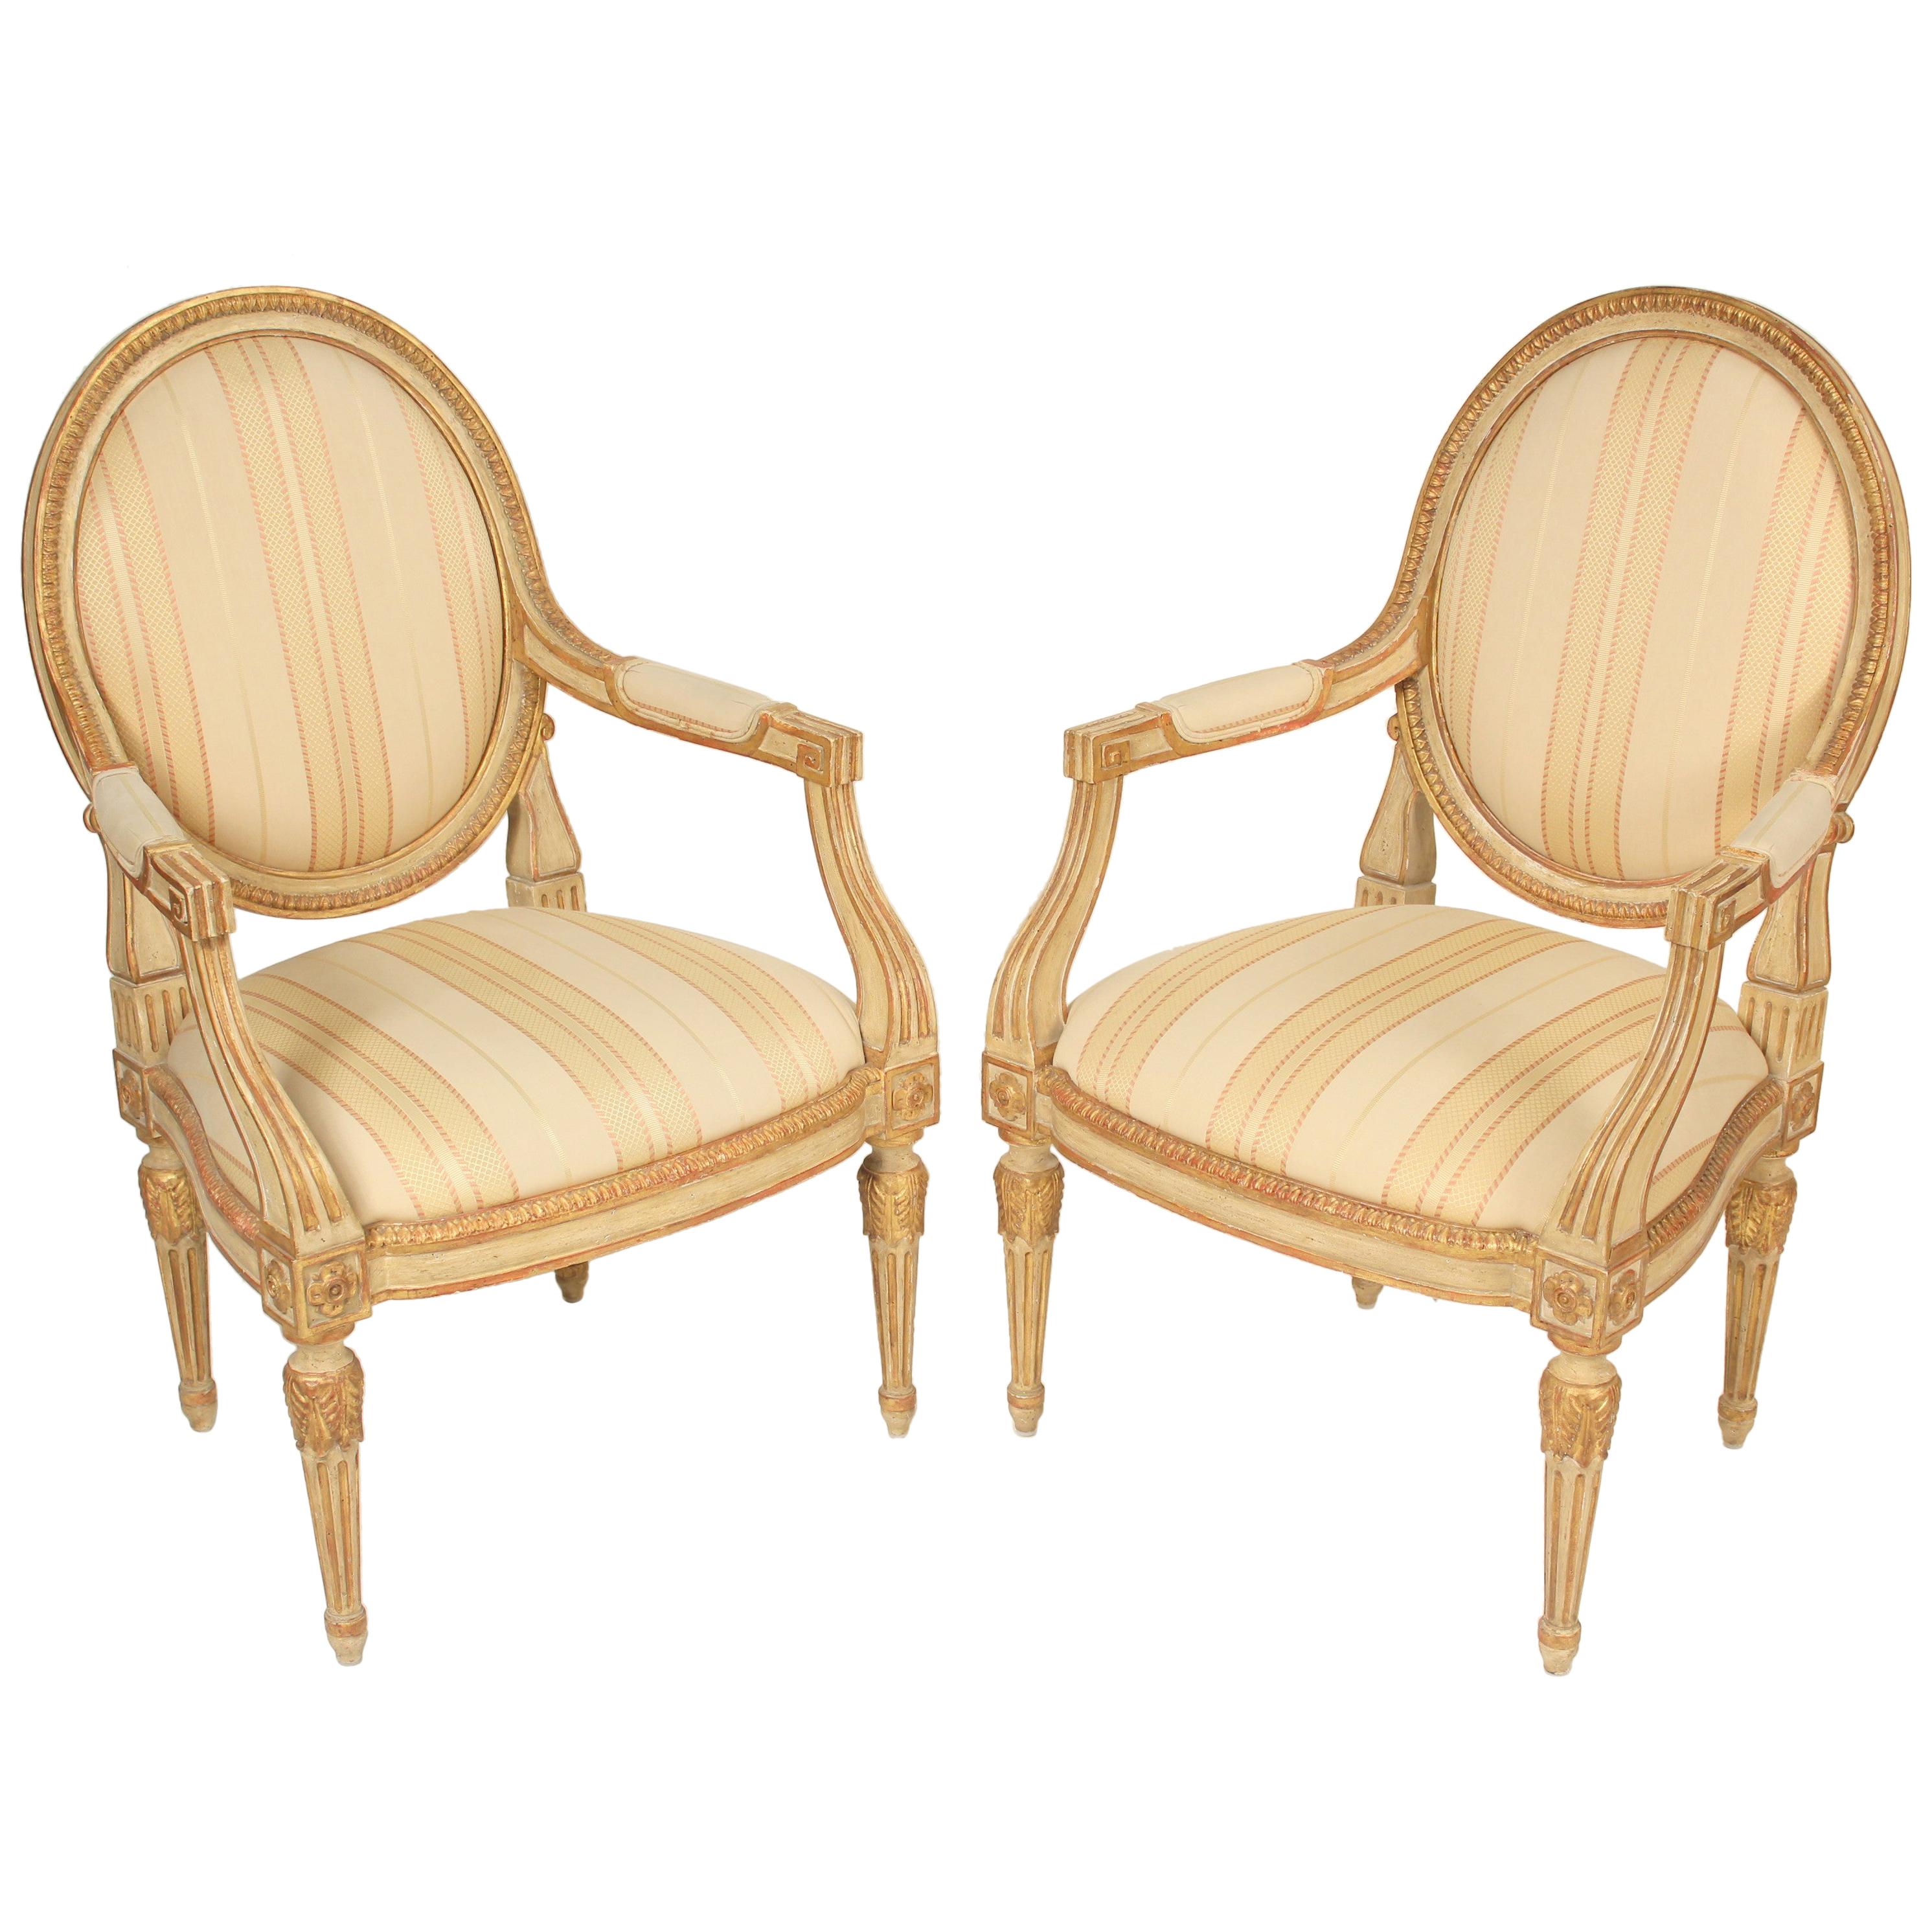 Pair of Dennis and Leen Louis XVI Style Armchairs